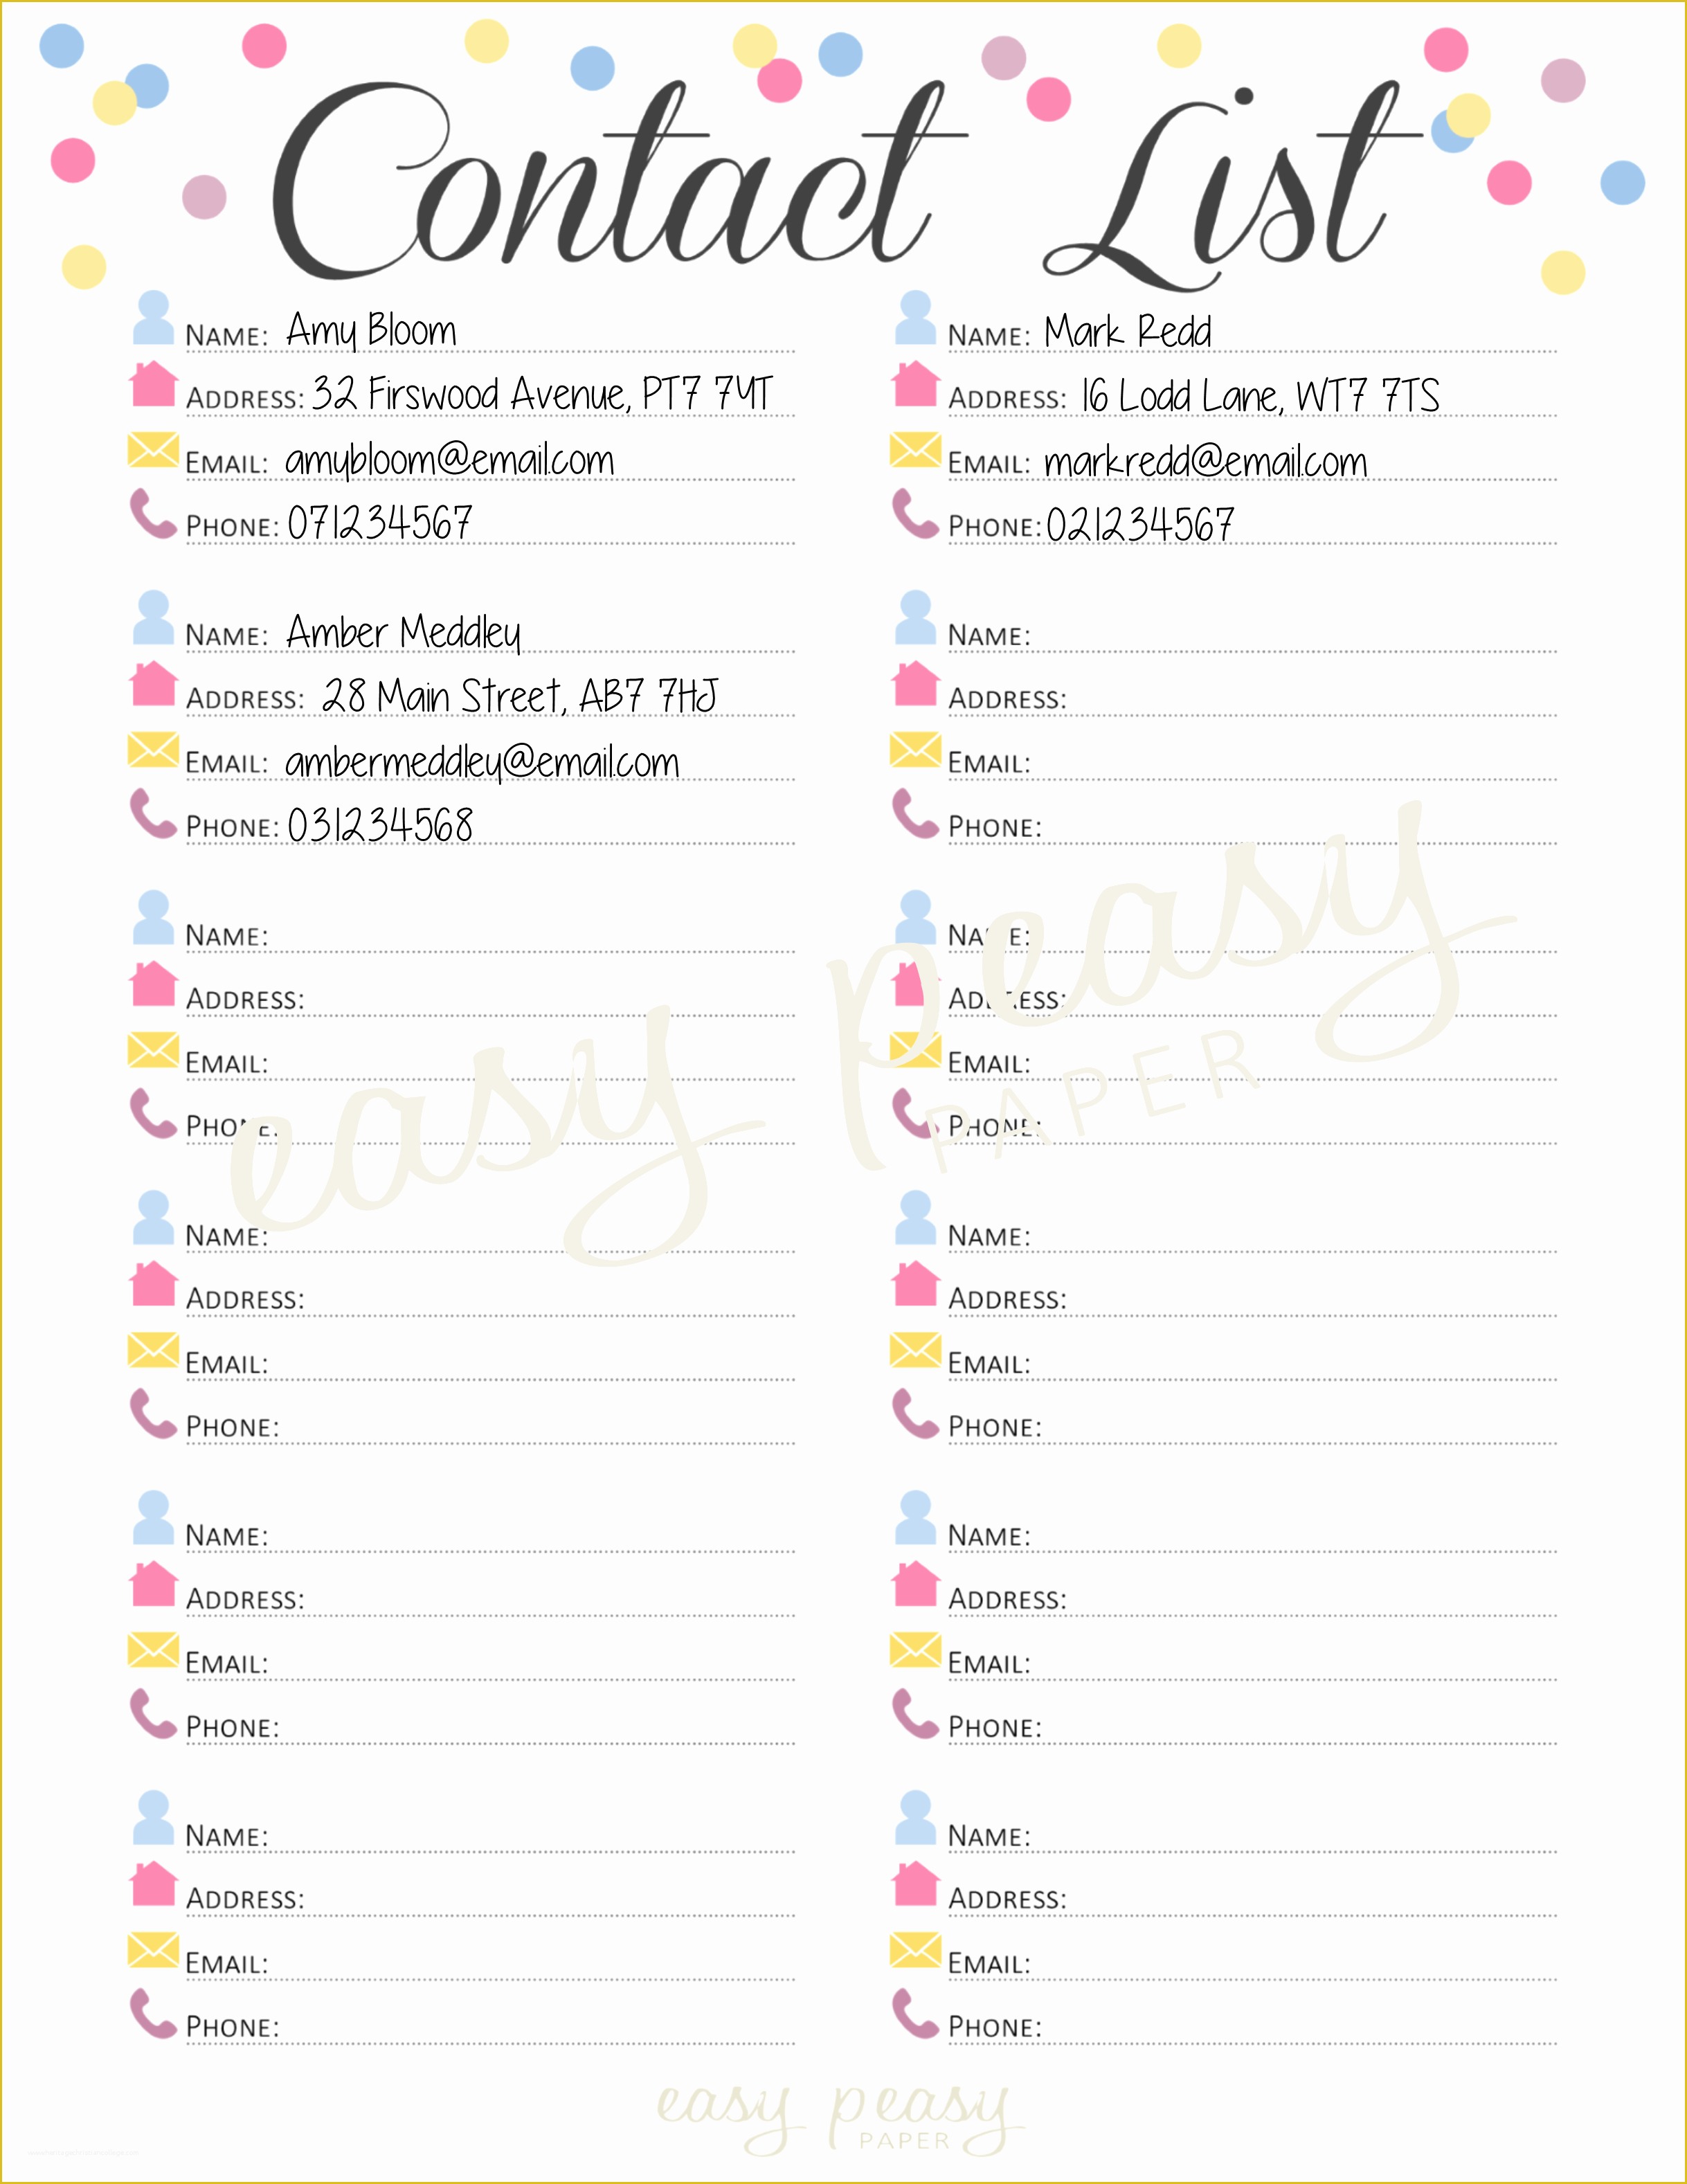 Free Contact List Template Of Contact List Printable From Easy Peasy Paper